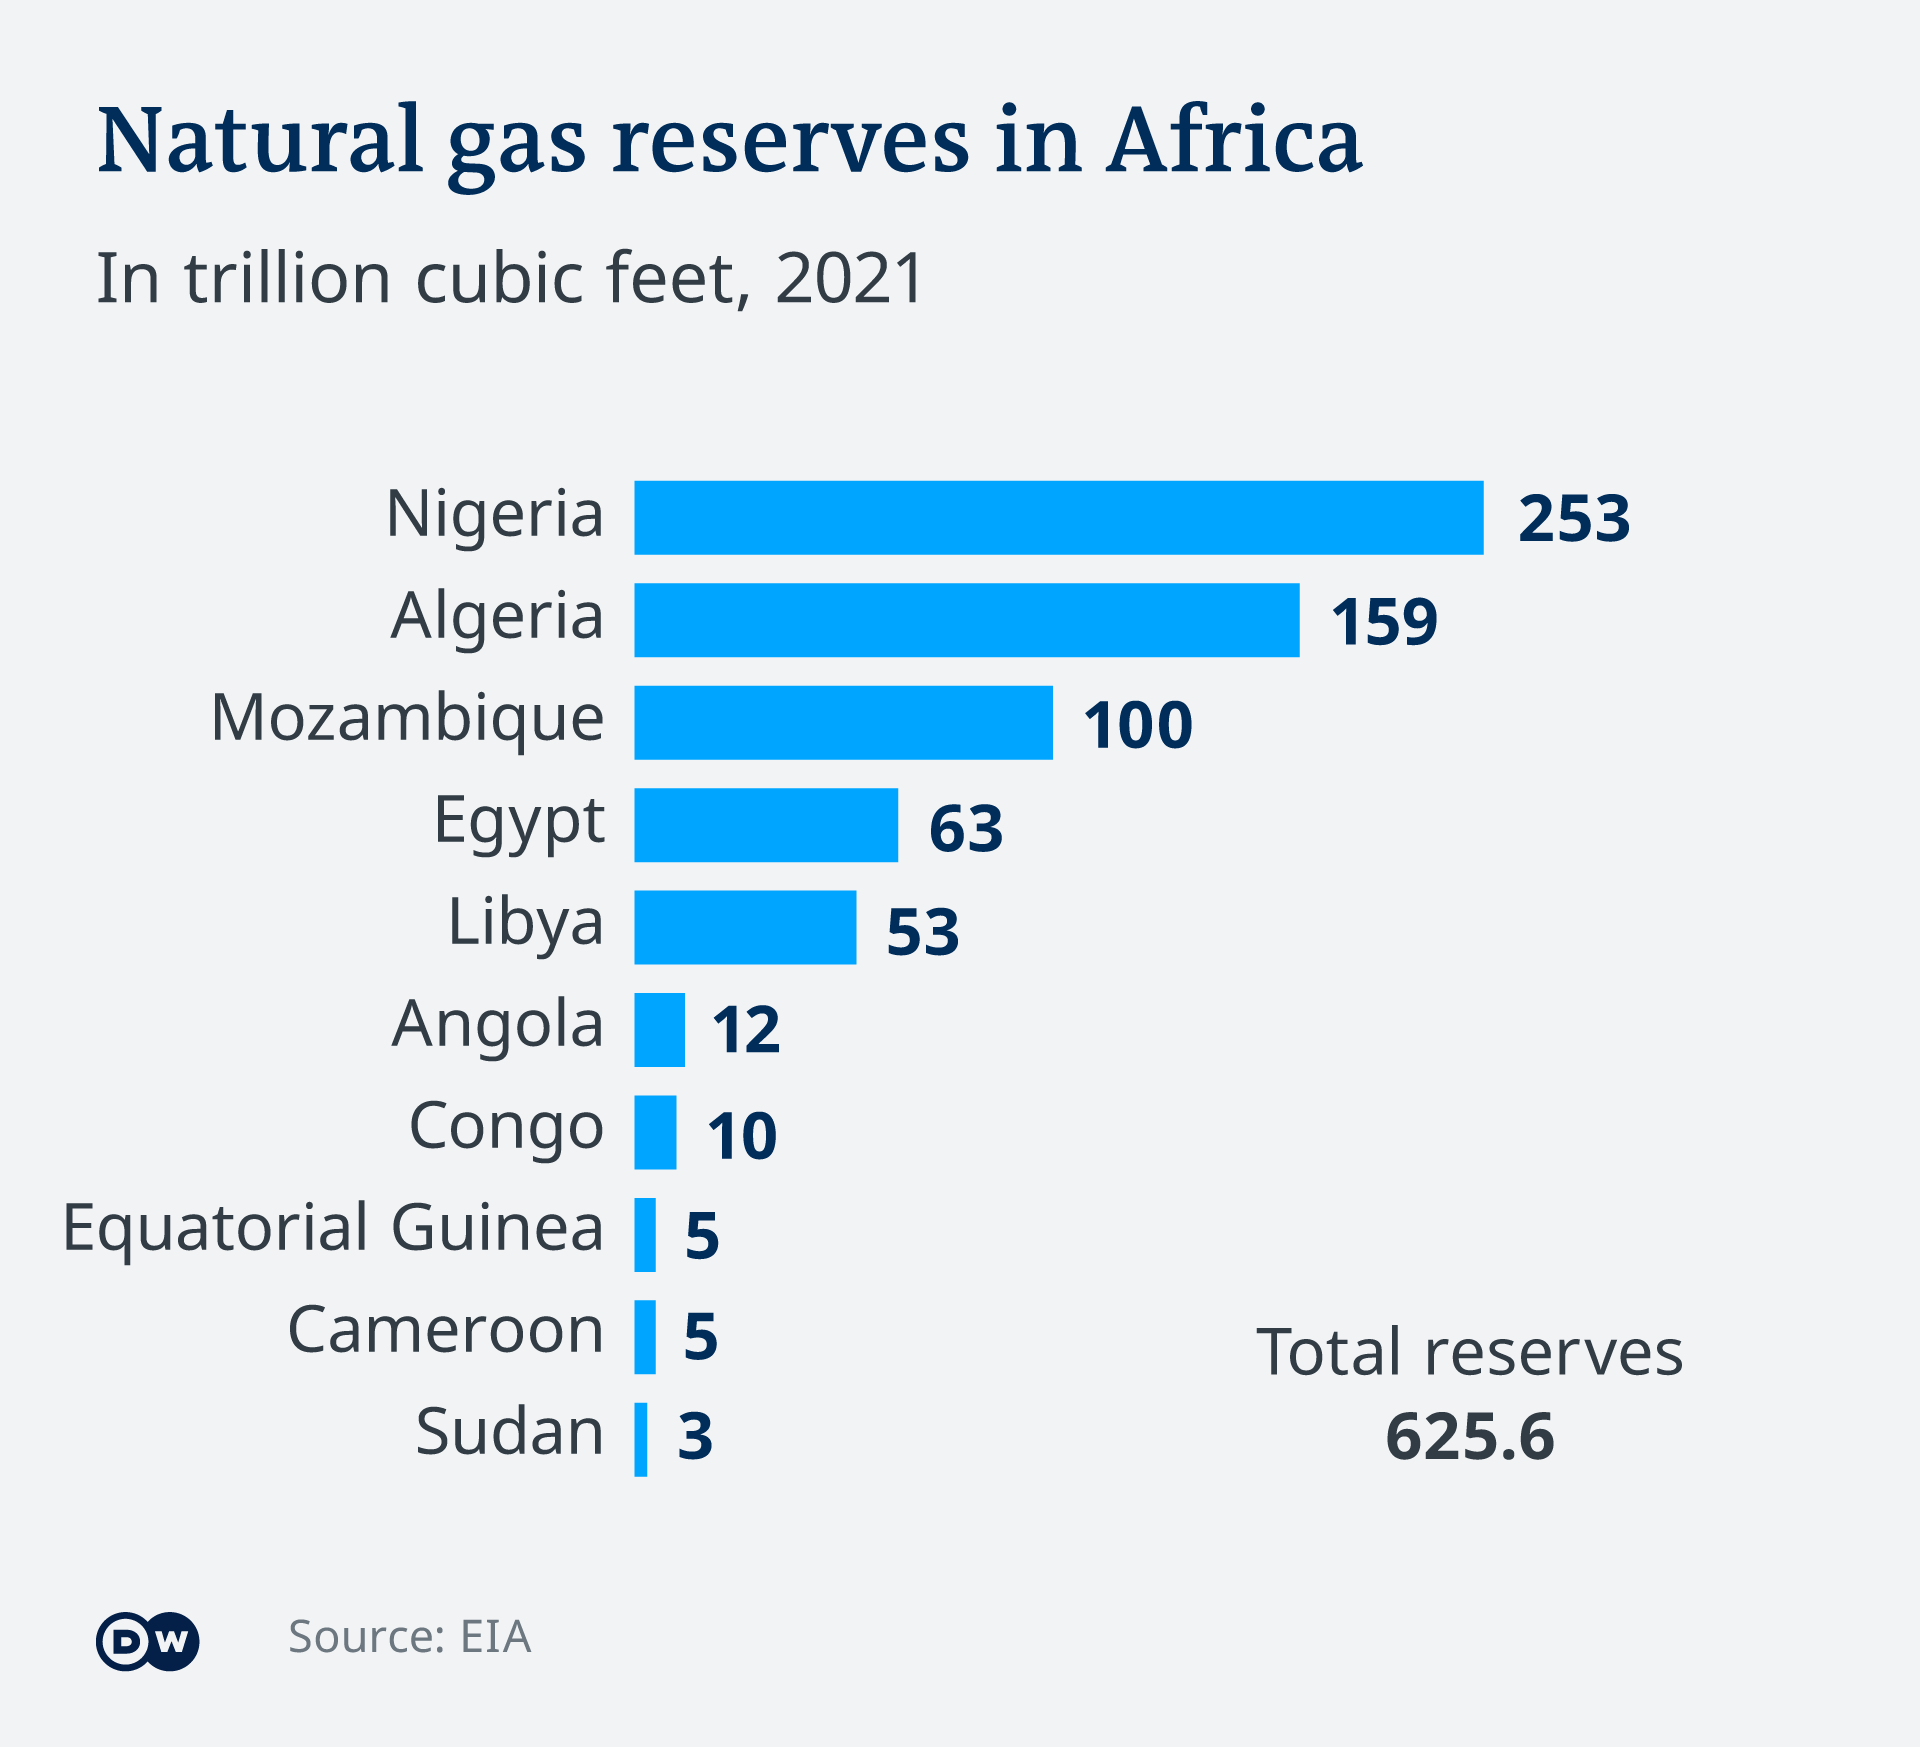 Natural gas reserves in Africa